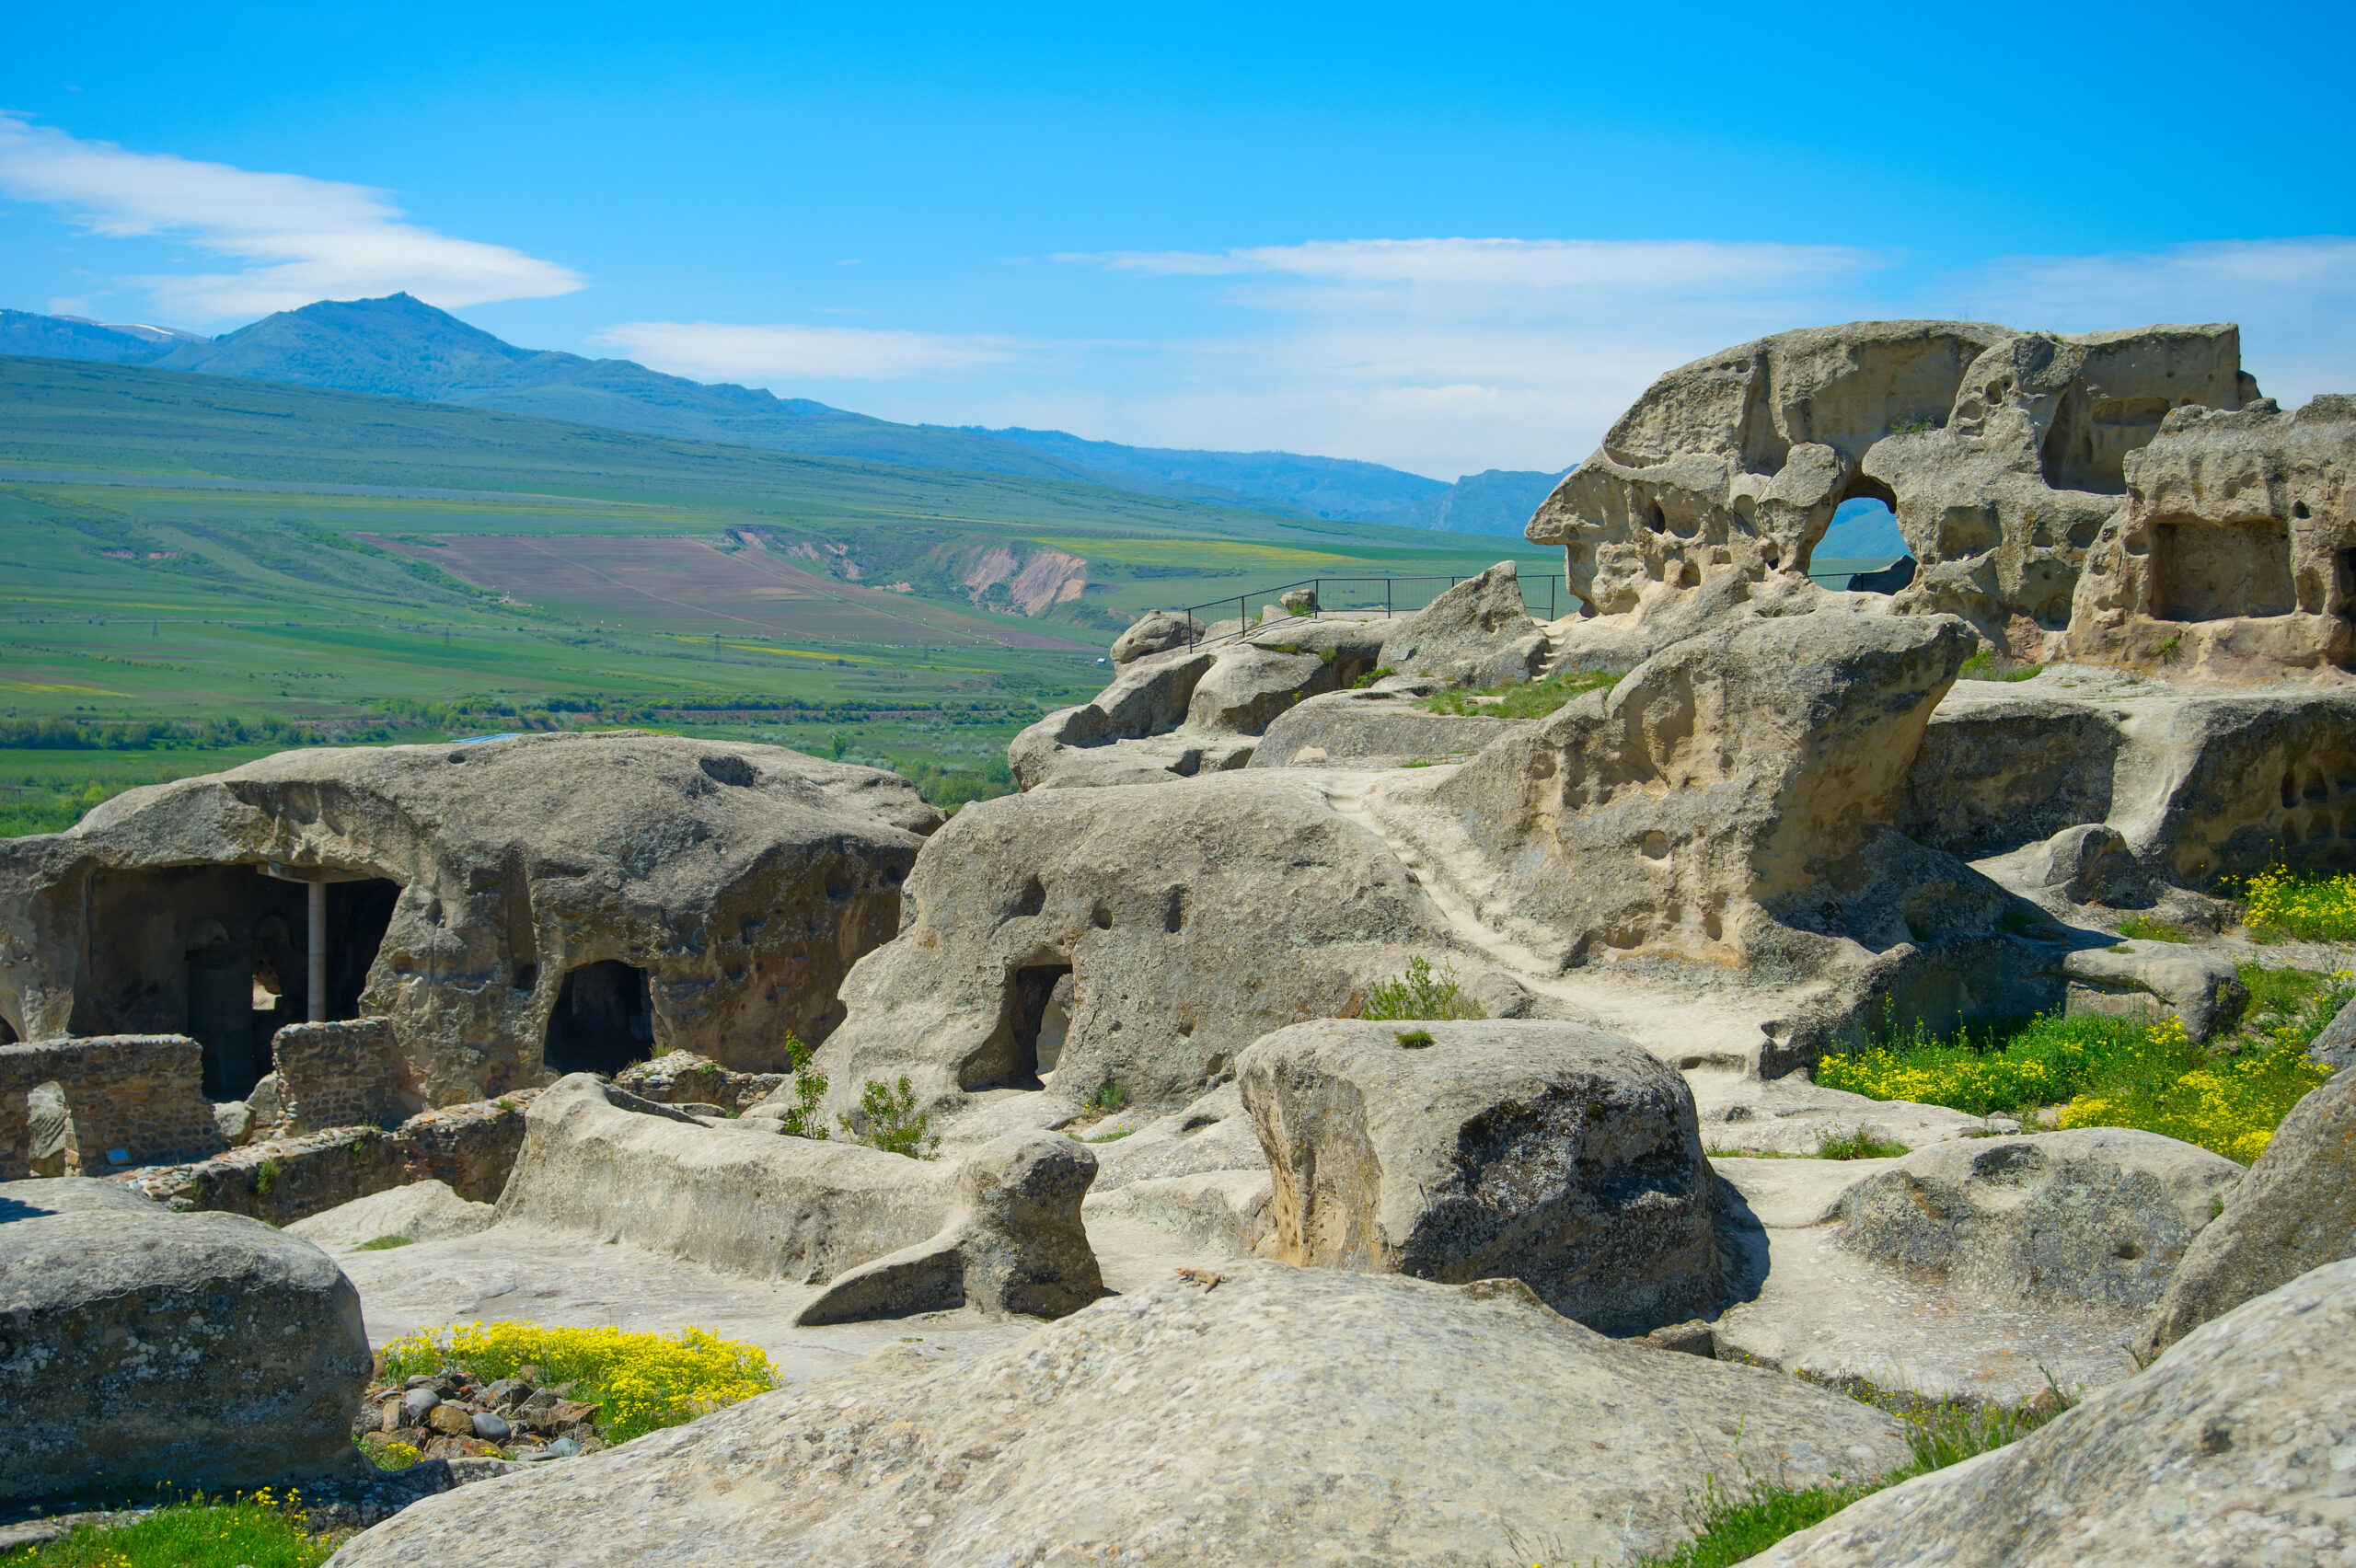 production-services-and-filming-in-georgia-via-swixer-ancient-rock-city